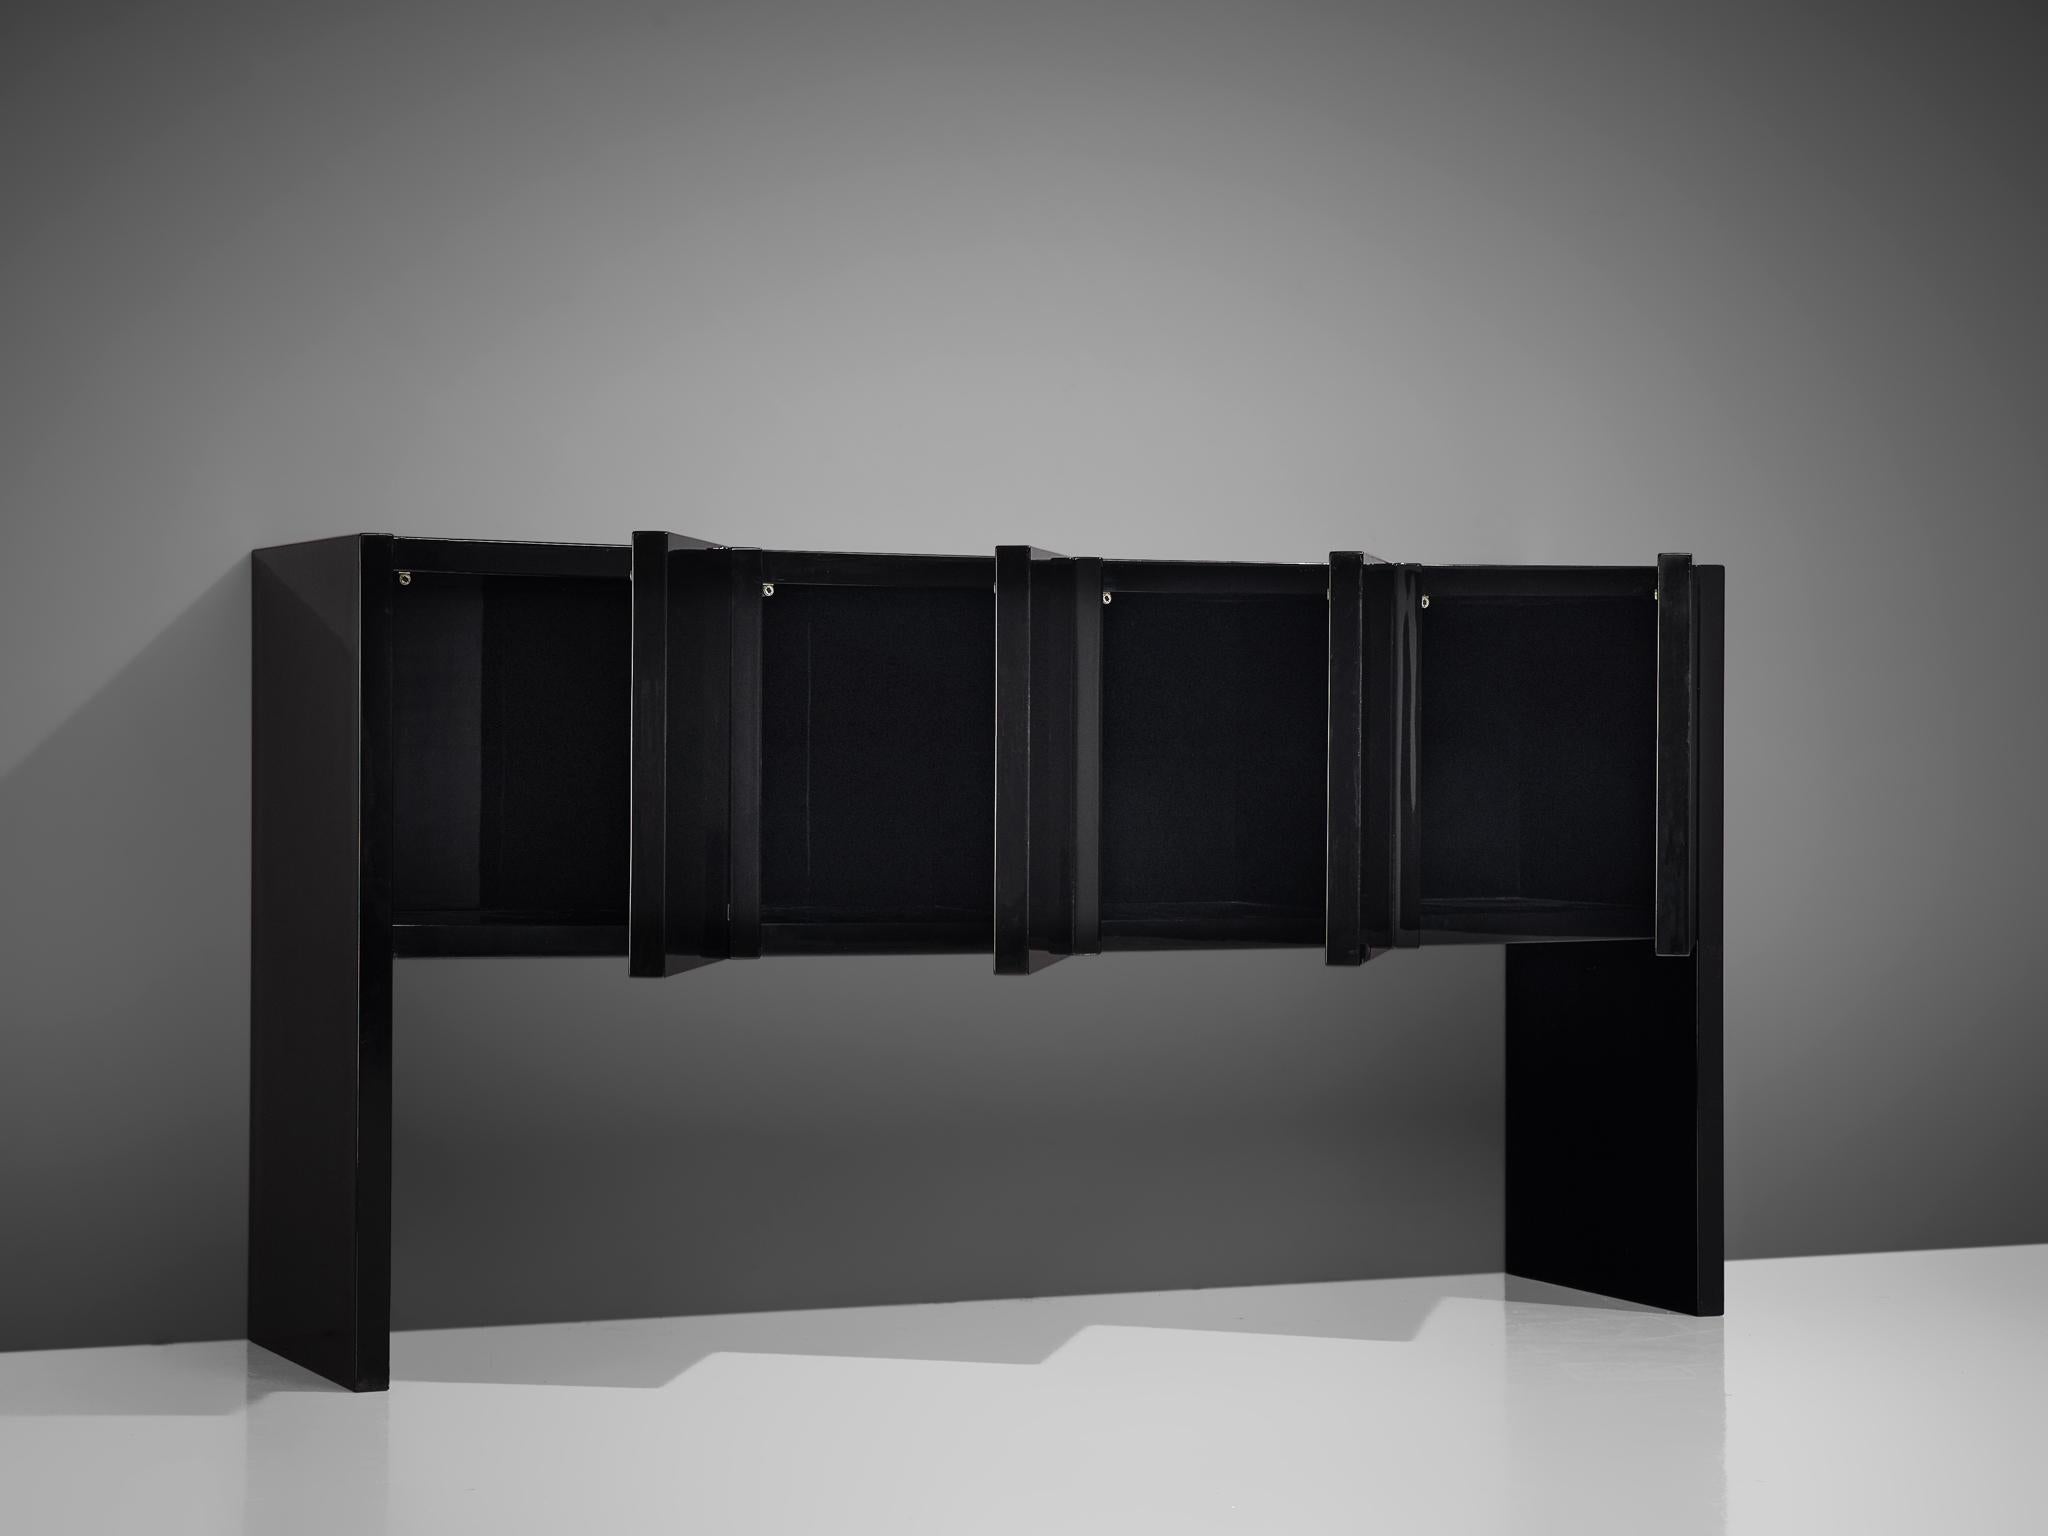 Massimo and Lella Vignelli for Poltronova, Saratoga sideboard, black lacquered wood, Italy, 1964. 

This sideboard is part of the 'Sartoga' livingroom collection, designed by Italian designer couple Lella & Massimo Vignelli. The Vignelli's were